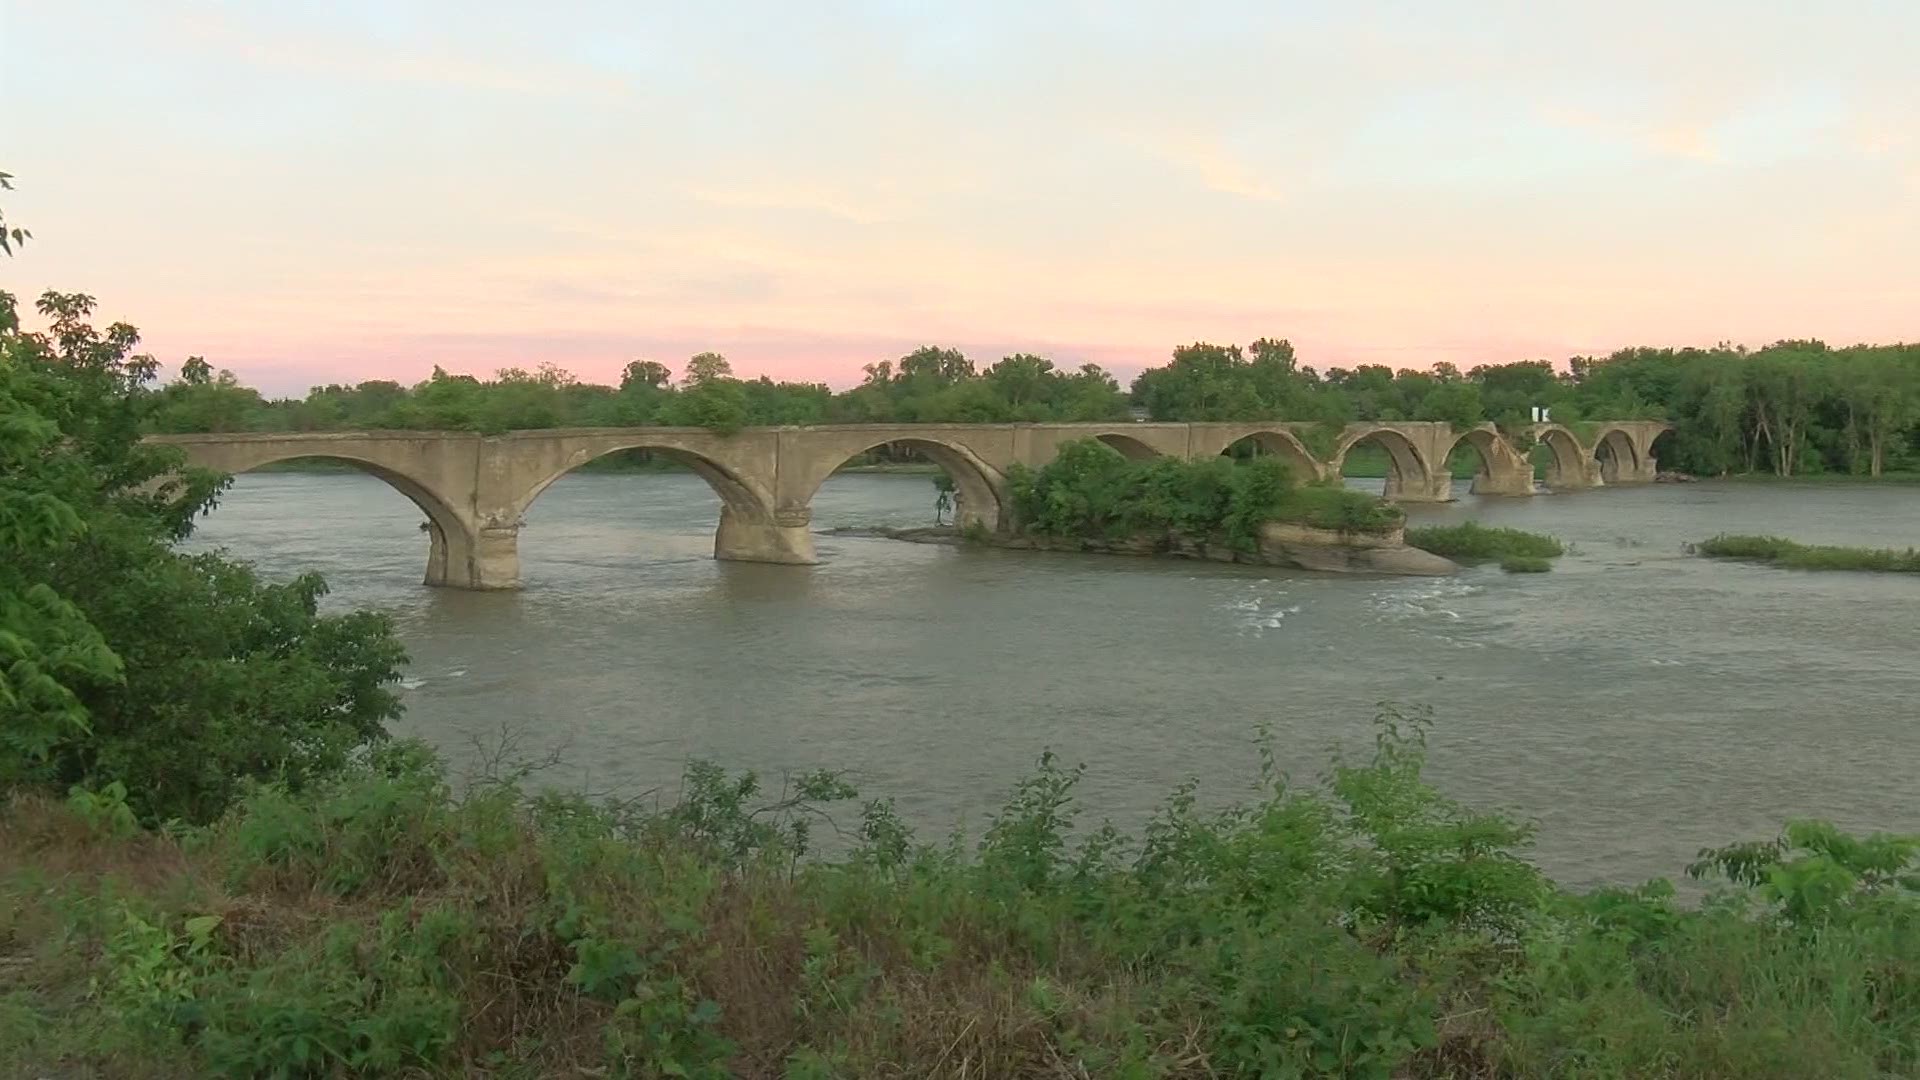 The Roche de Boeuf bridge needs millions of dollars in repairs and will be demolished if no one buys it.